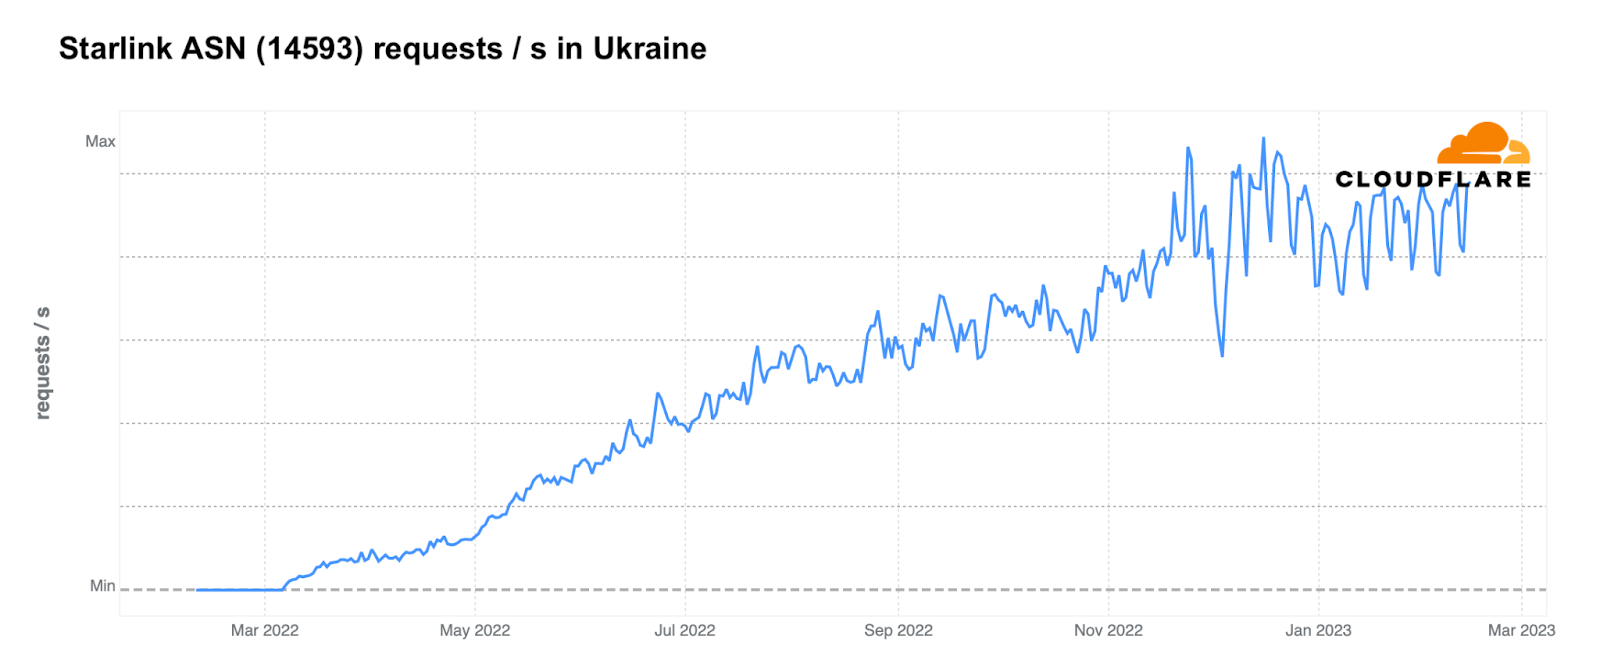 One year of war in Ukraine: Internet trends, attacks, and resilience